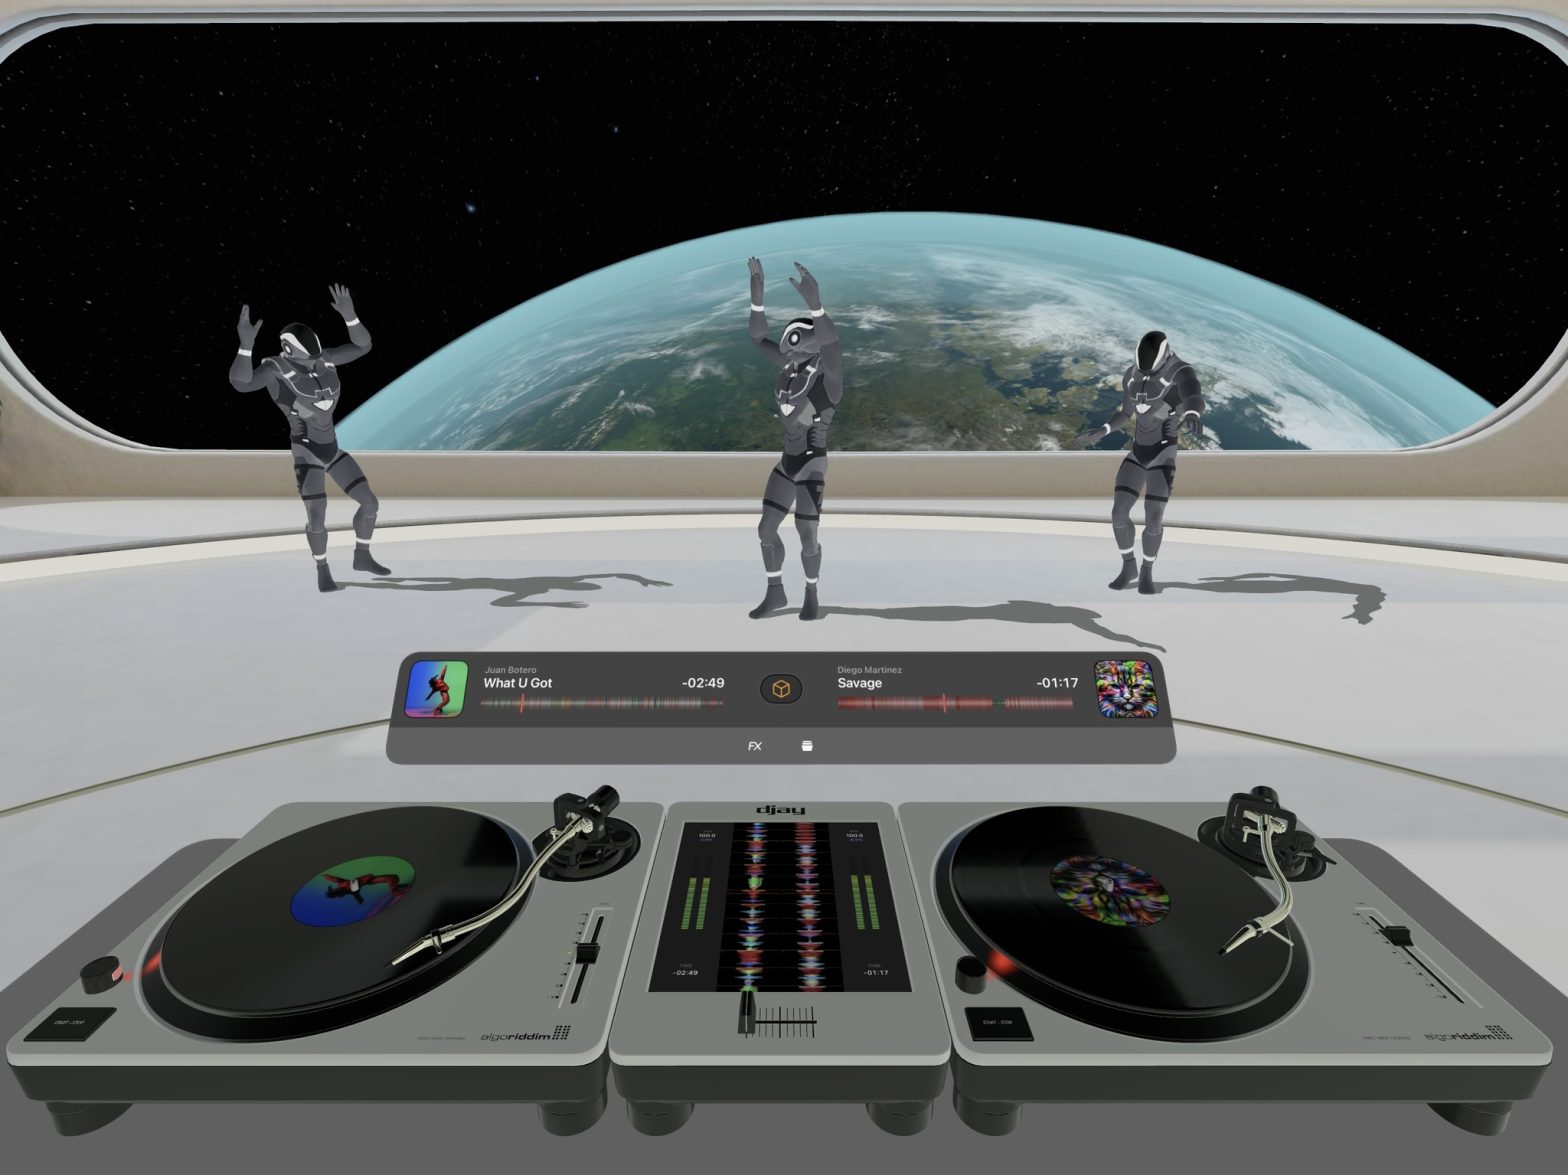 A screenshot from the app djay, which shows a set of two turntables and assorted controls in an immersive environment that resembles a space lounge with a huge window overlooking the Earth. Inside the room, three robots are seen dancing along to the beat.